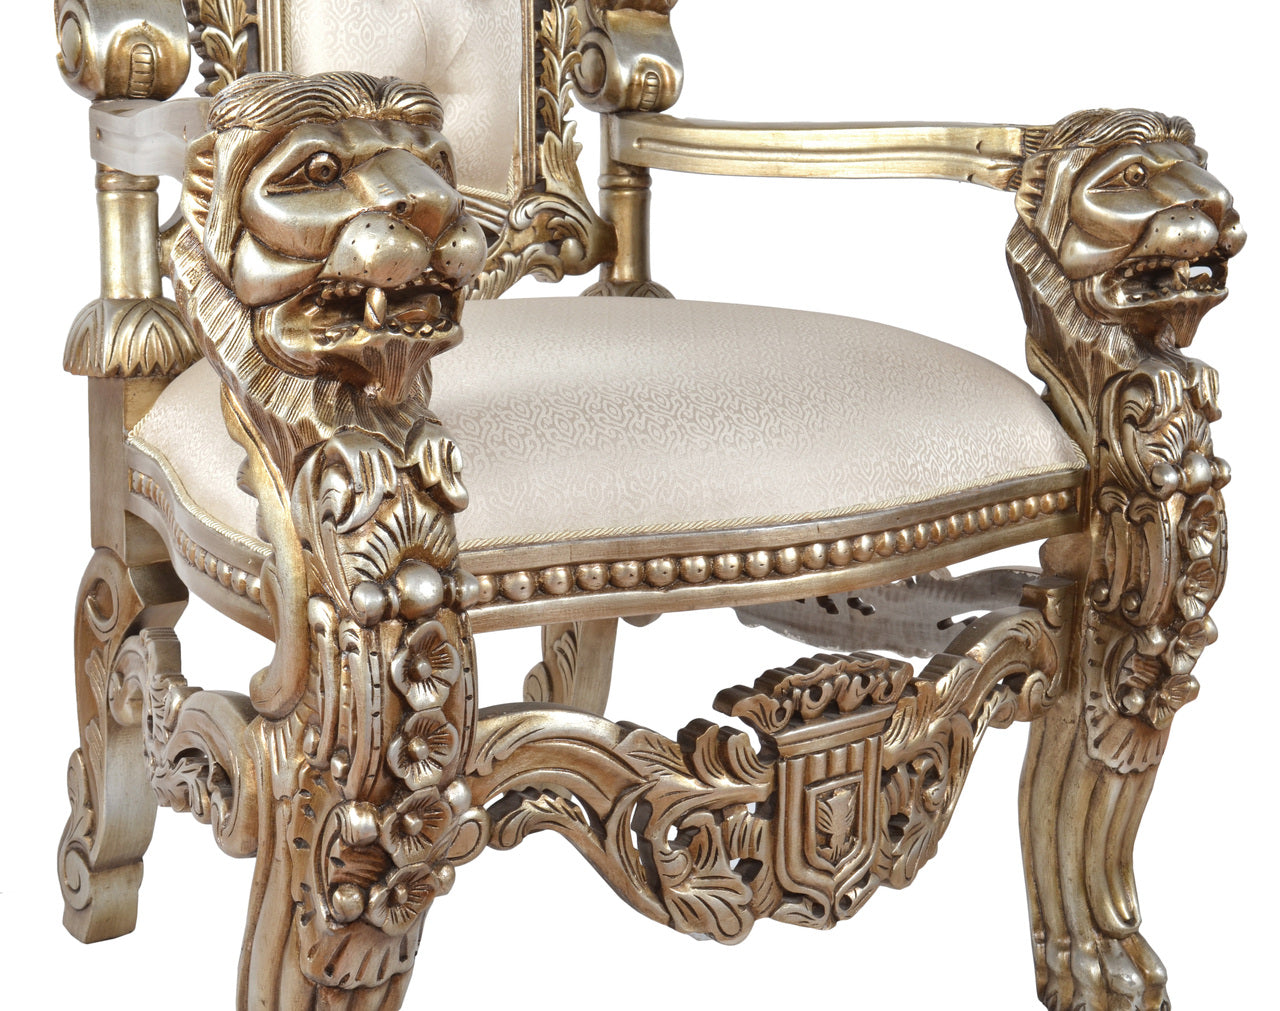 Hand carved Royal King Lion Chair Gold - Furniture on Main